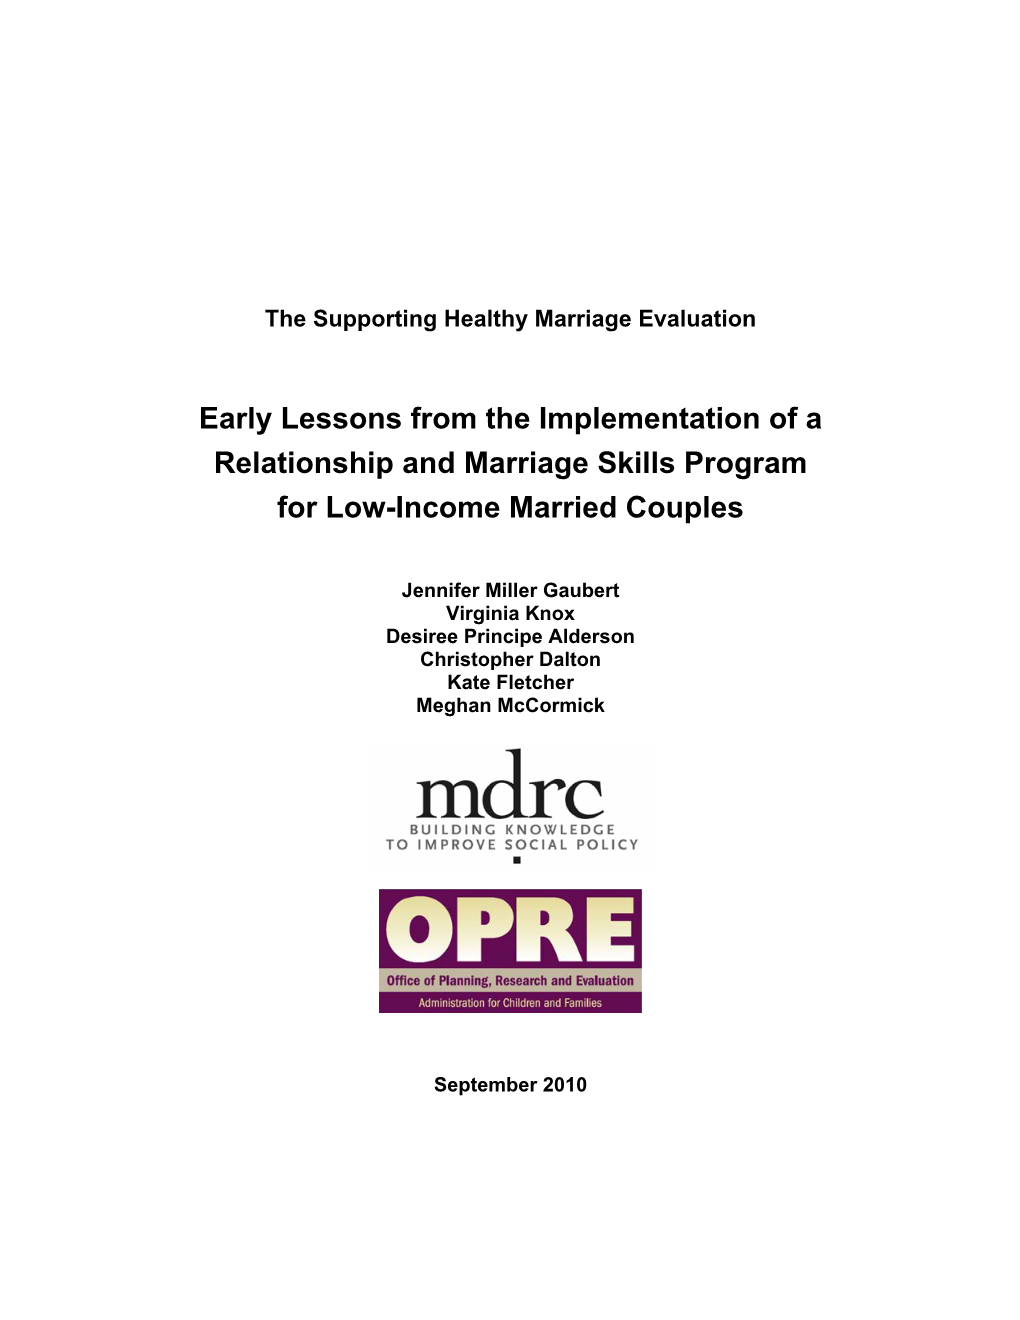 Early Lessons from the Implementation of a Relationship and Marriage Skills Program for Low-Income Married Couples